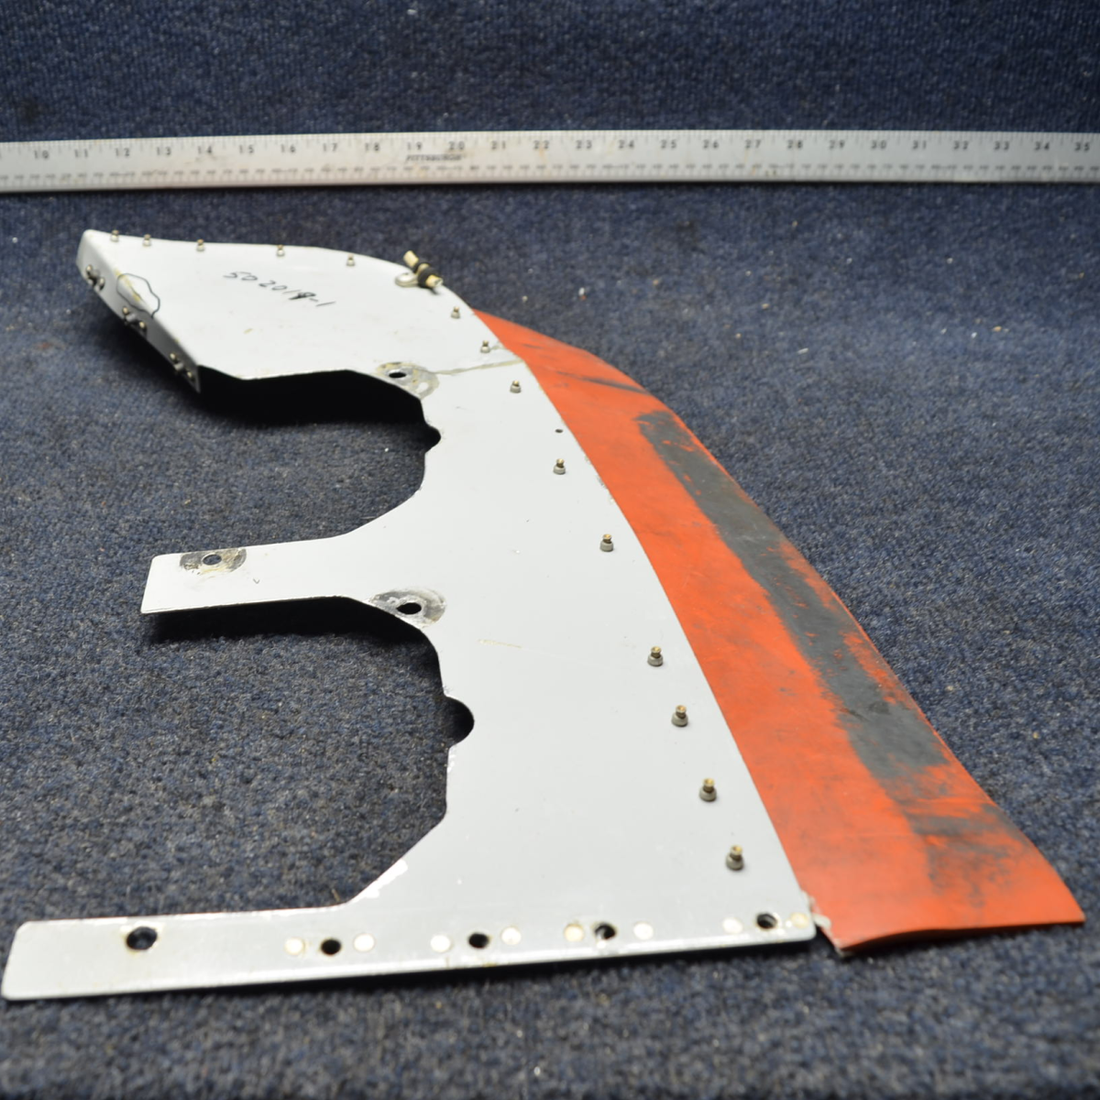 Used aircraft parts for sale, 502019-1 PIPER- CESSNA-BEECH- MOONEY VARIOS GRUMMAN LH SIDE BAFFLE